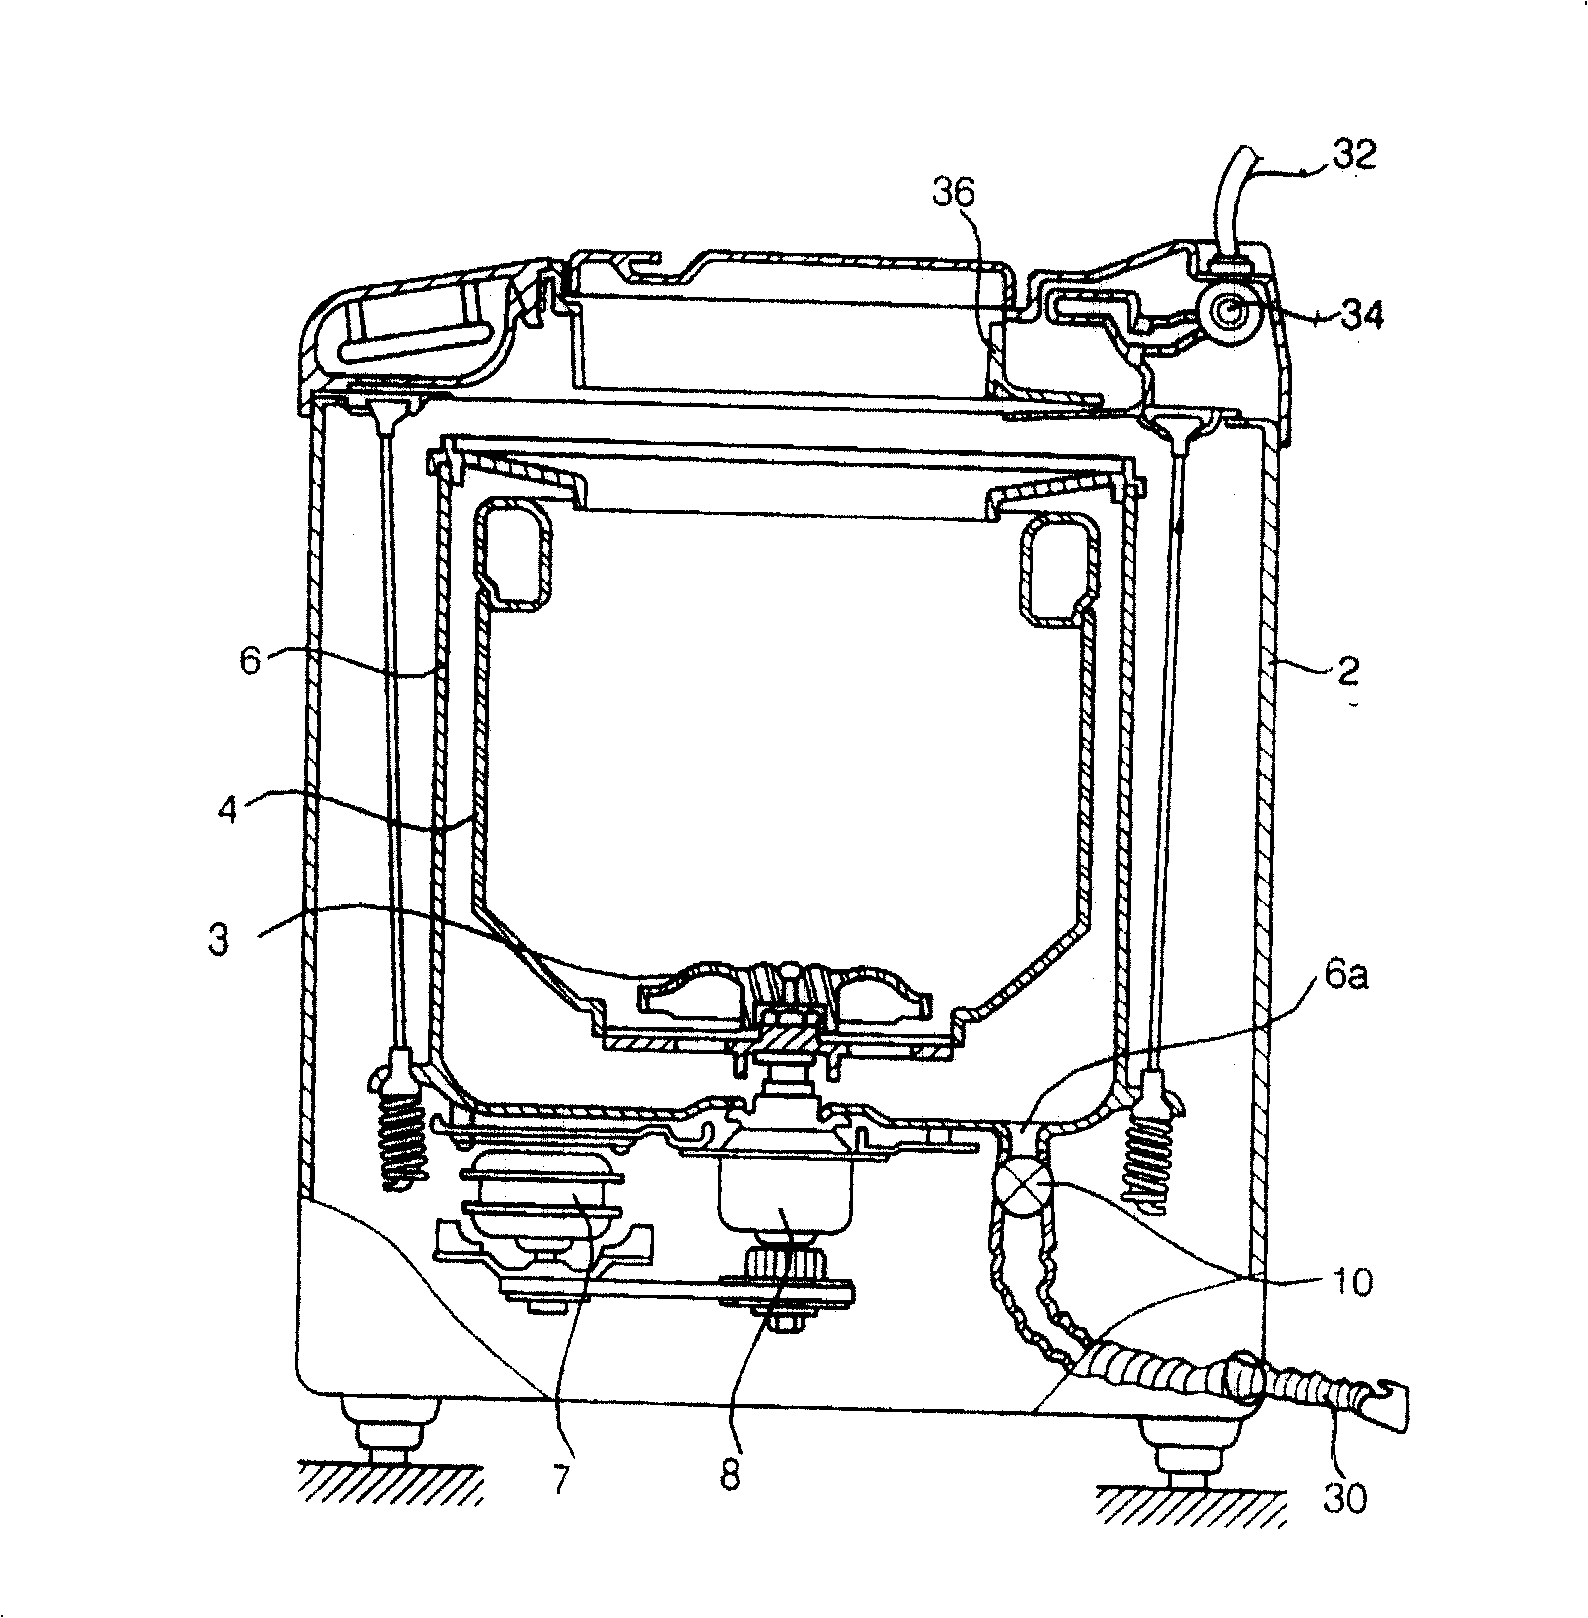 Connection structure of draining valve for washer